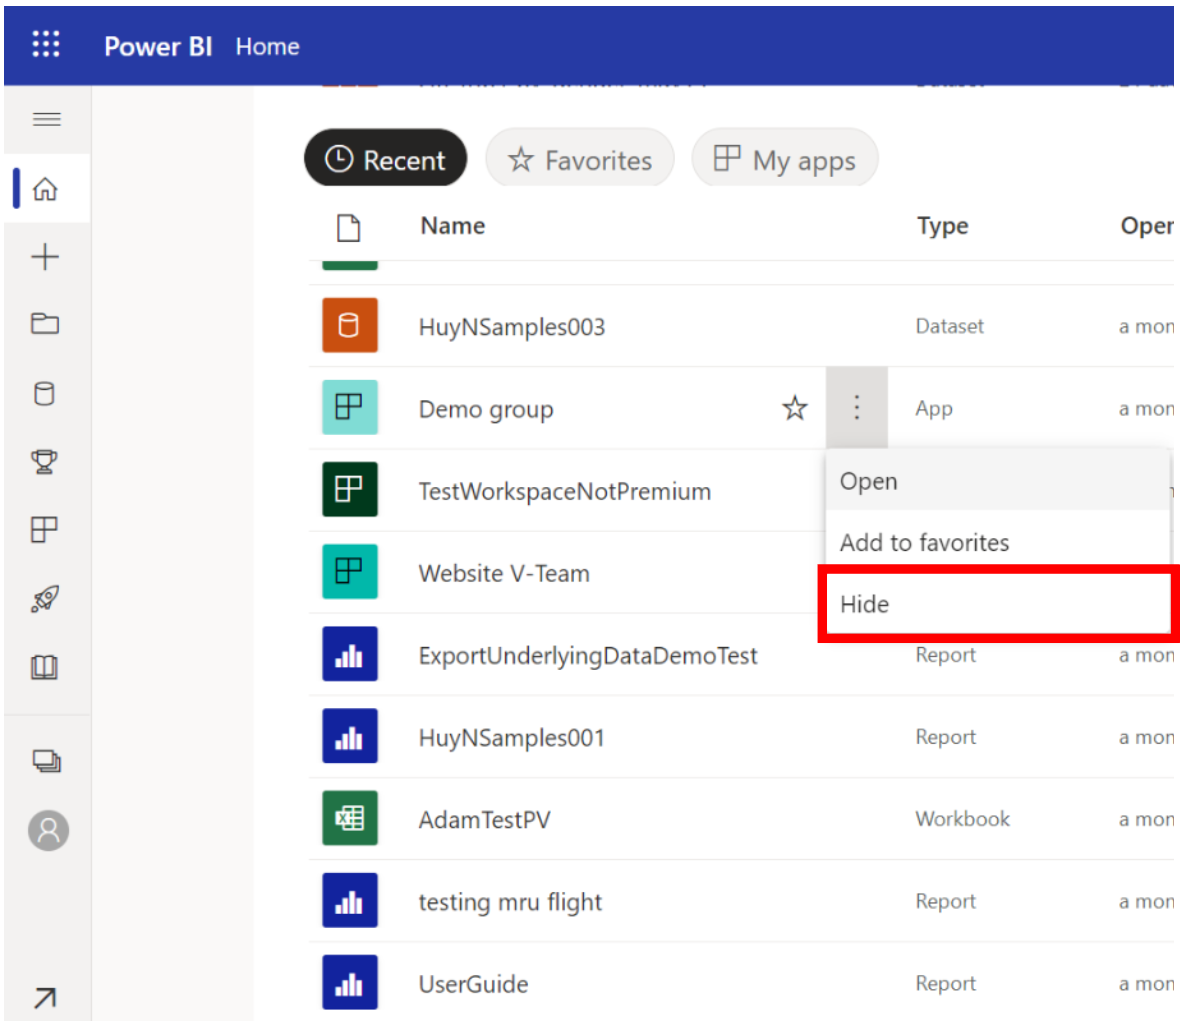 If you have hidden any of your Power BI content prior to retirement, that content will stay hidden, and you will have access to your hidden content within your settings pane.